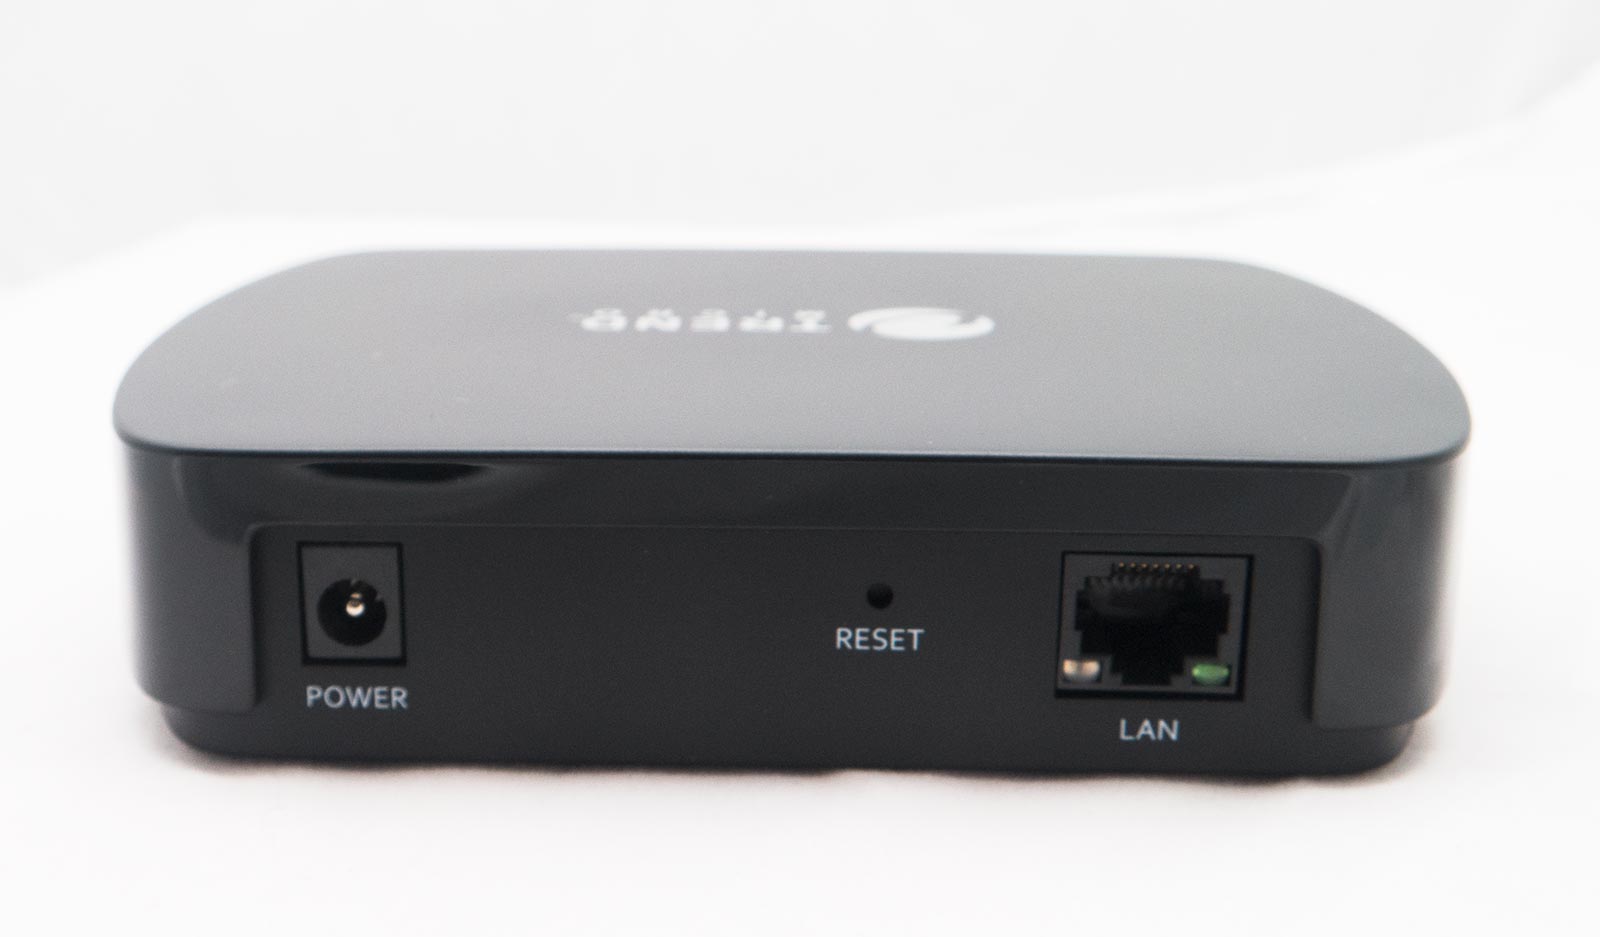 Trend Micro's Home Network Security connects to power and plugs into your router by way of an Ethernet cable. From there, it checks through every bit of traffic that passes by your network.